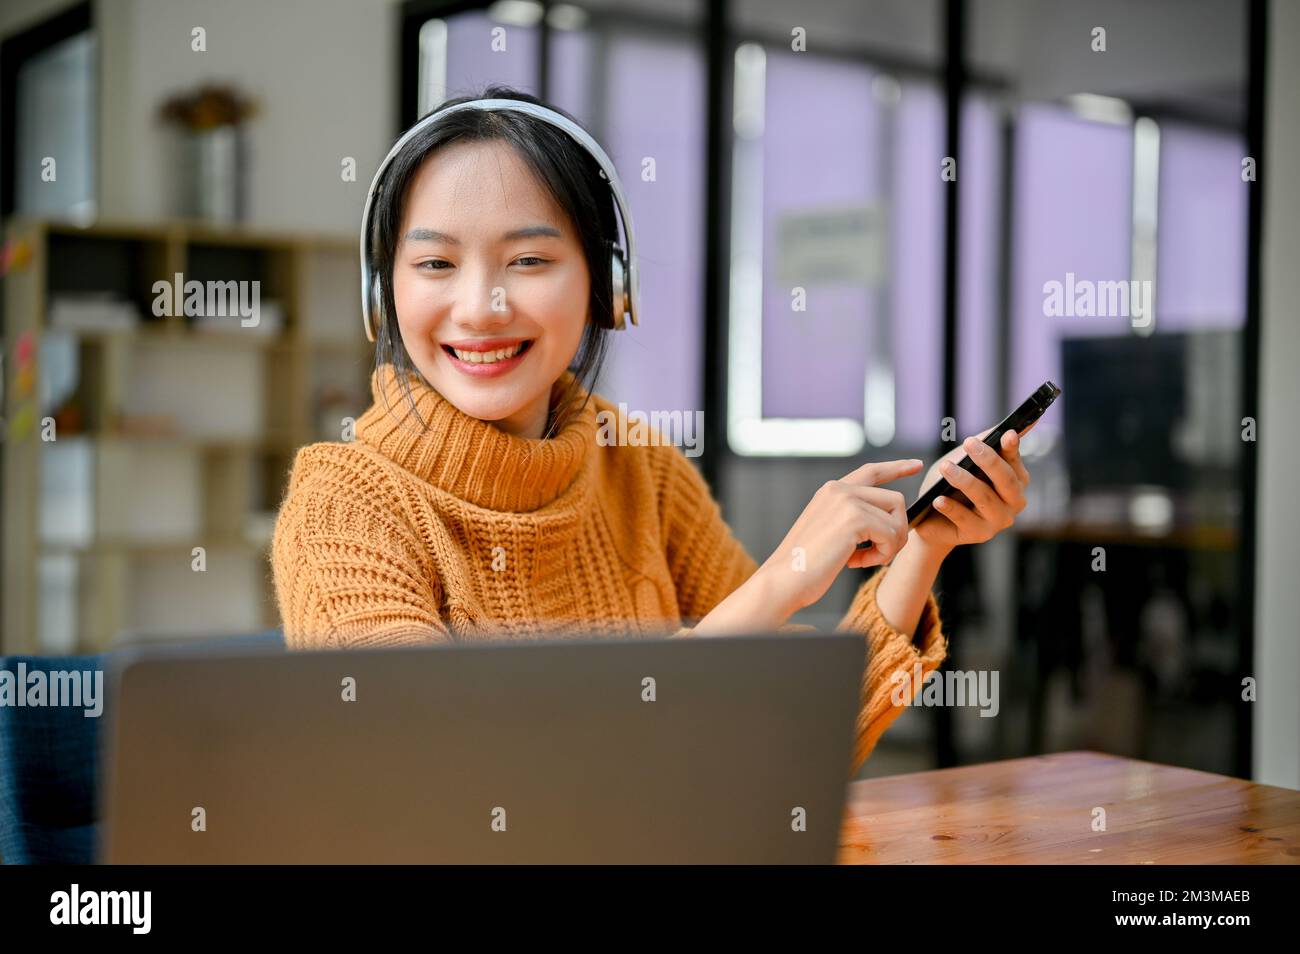 Cheerful and pretty young Asian female looking at laptop screen, holding her smartphone and listening to music through her headphones. Stock Photo